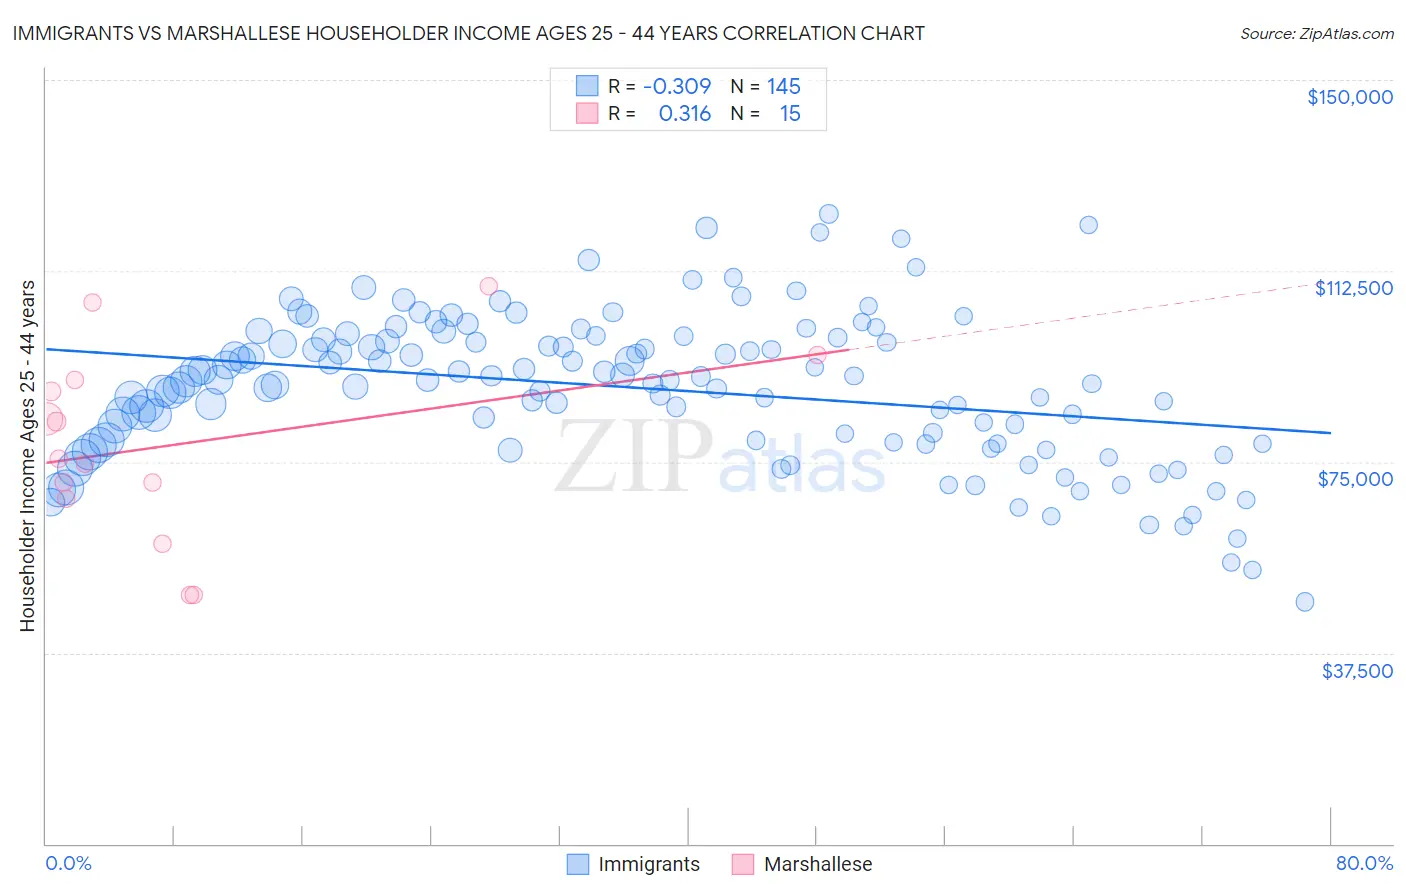 Immigrants vs Marshallese Householder Income Ages 25 - 44 years